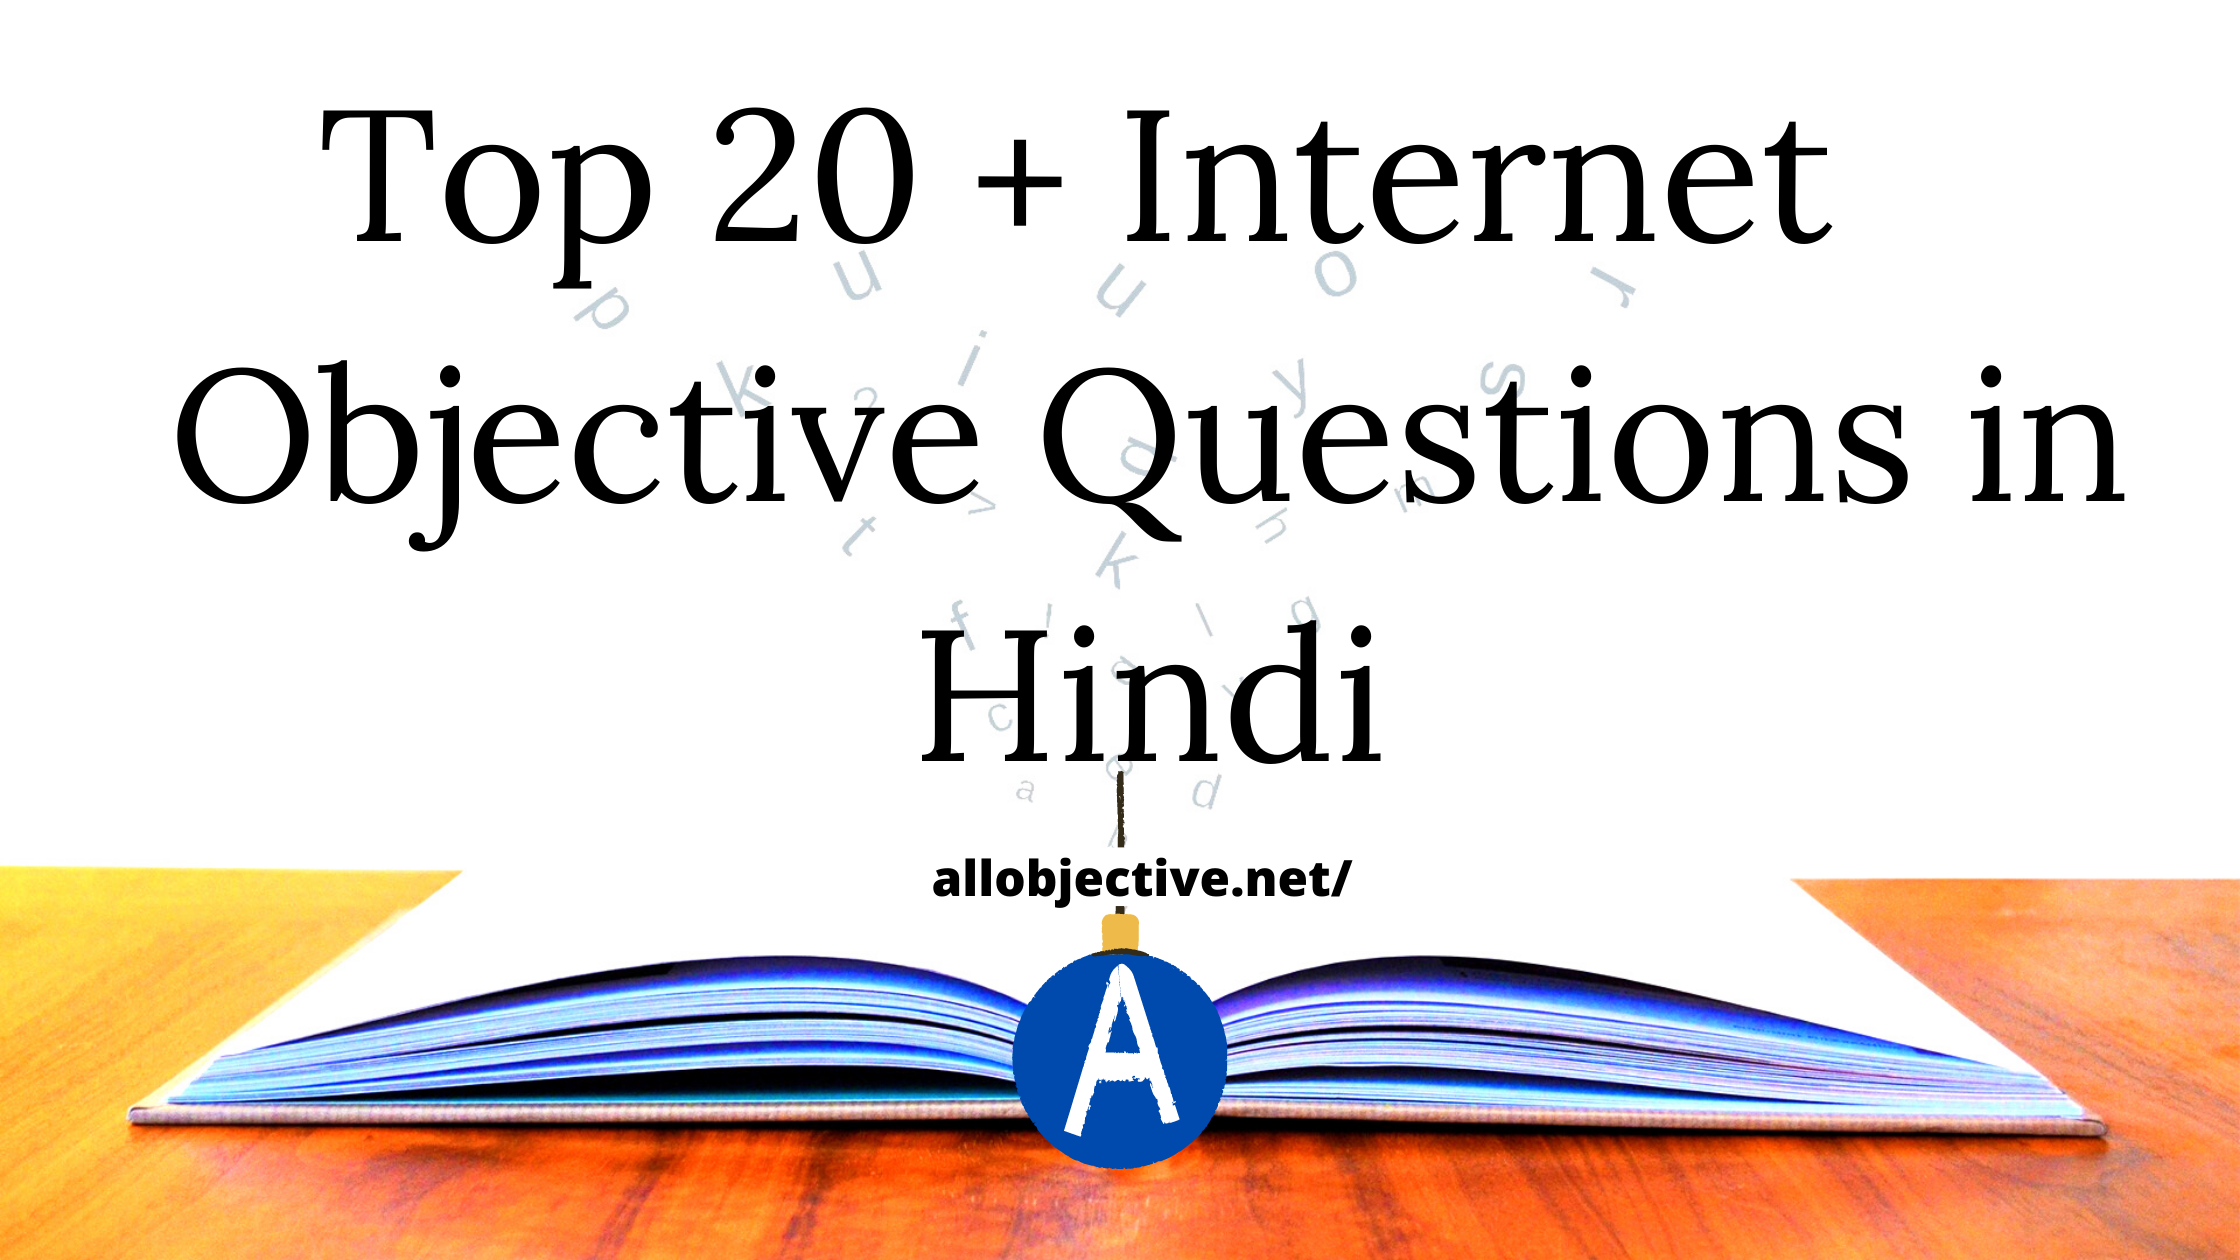 Internet Objective Questions in Hindi